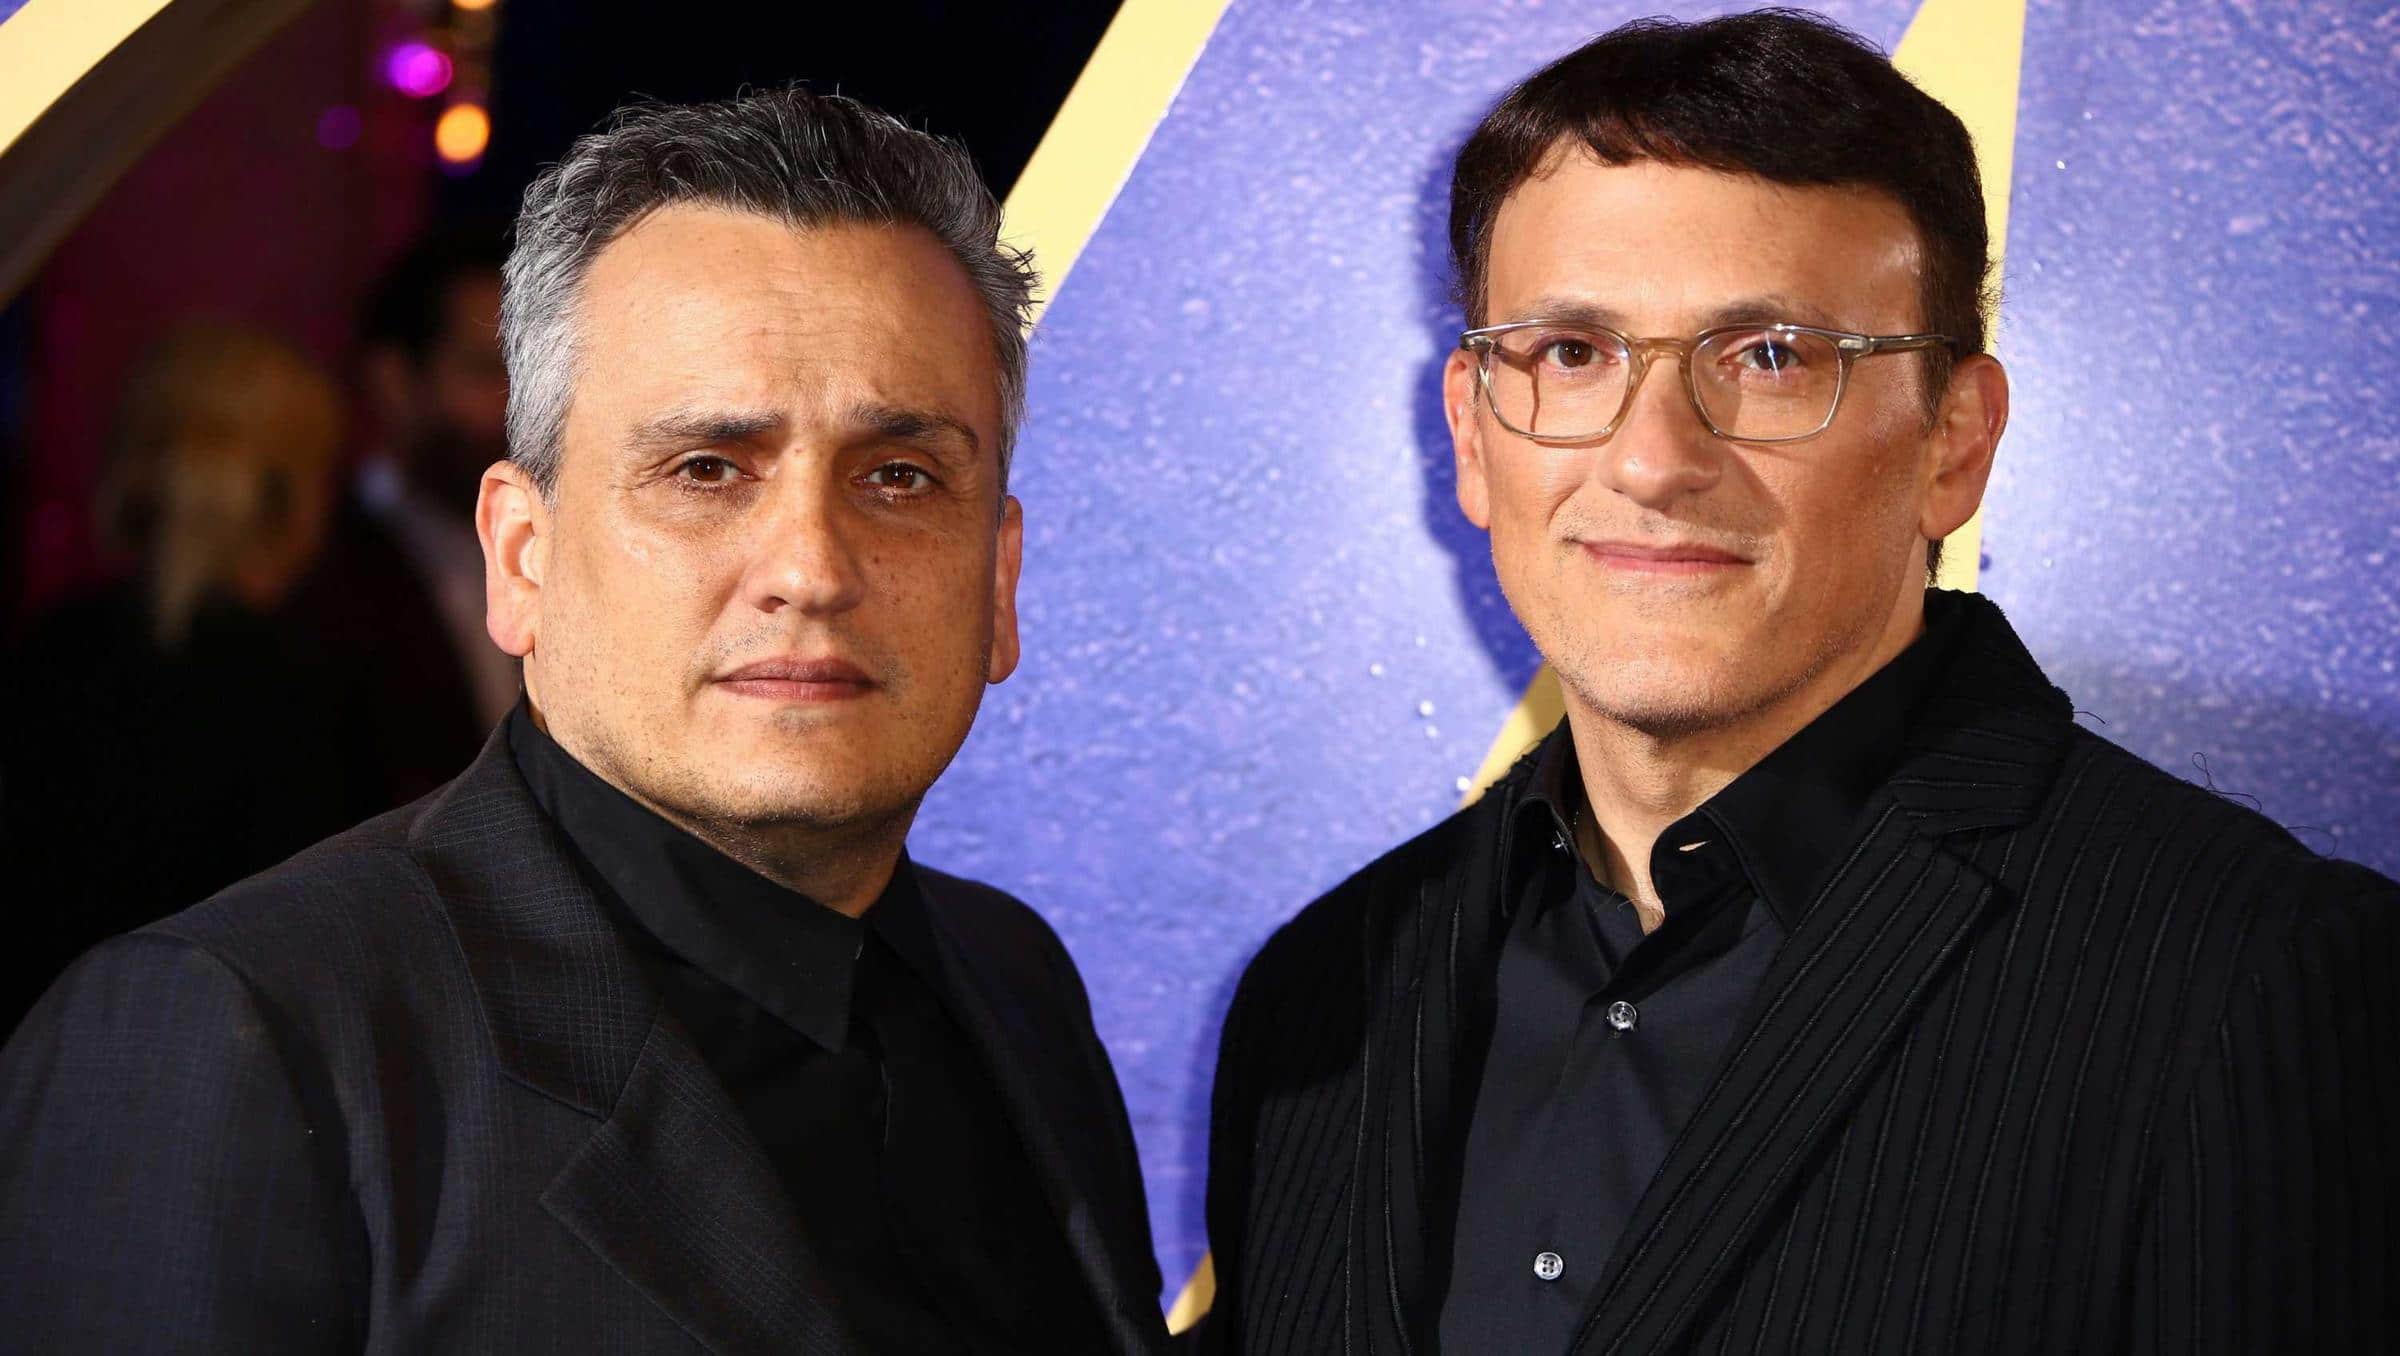 Russo Brothers responds to Marvel Bashing by Martin Scorsese